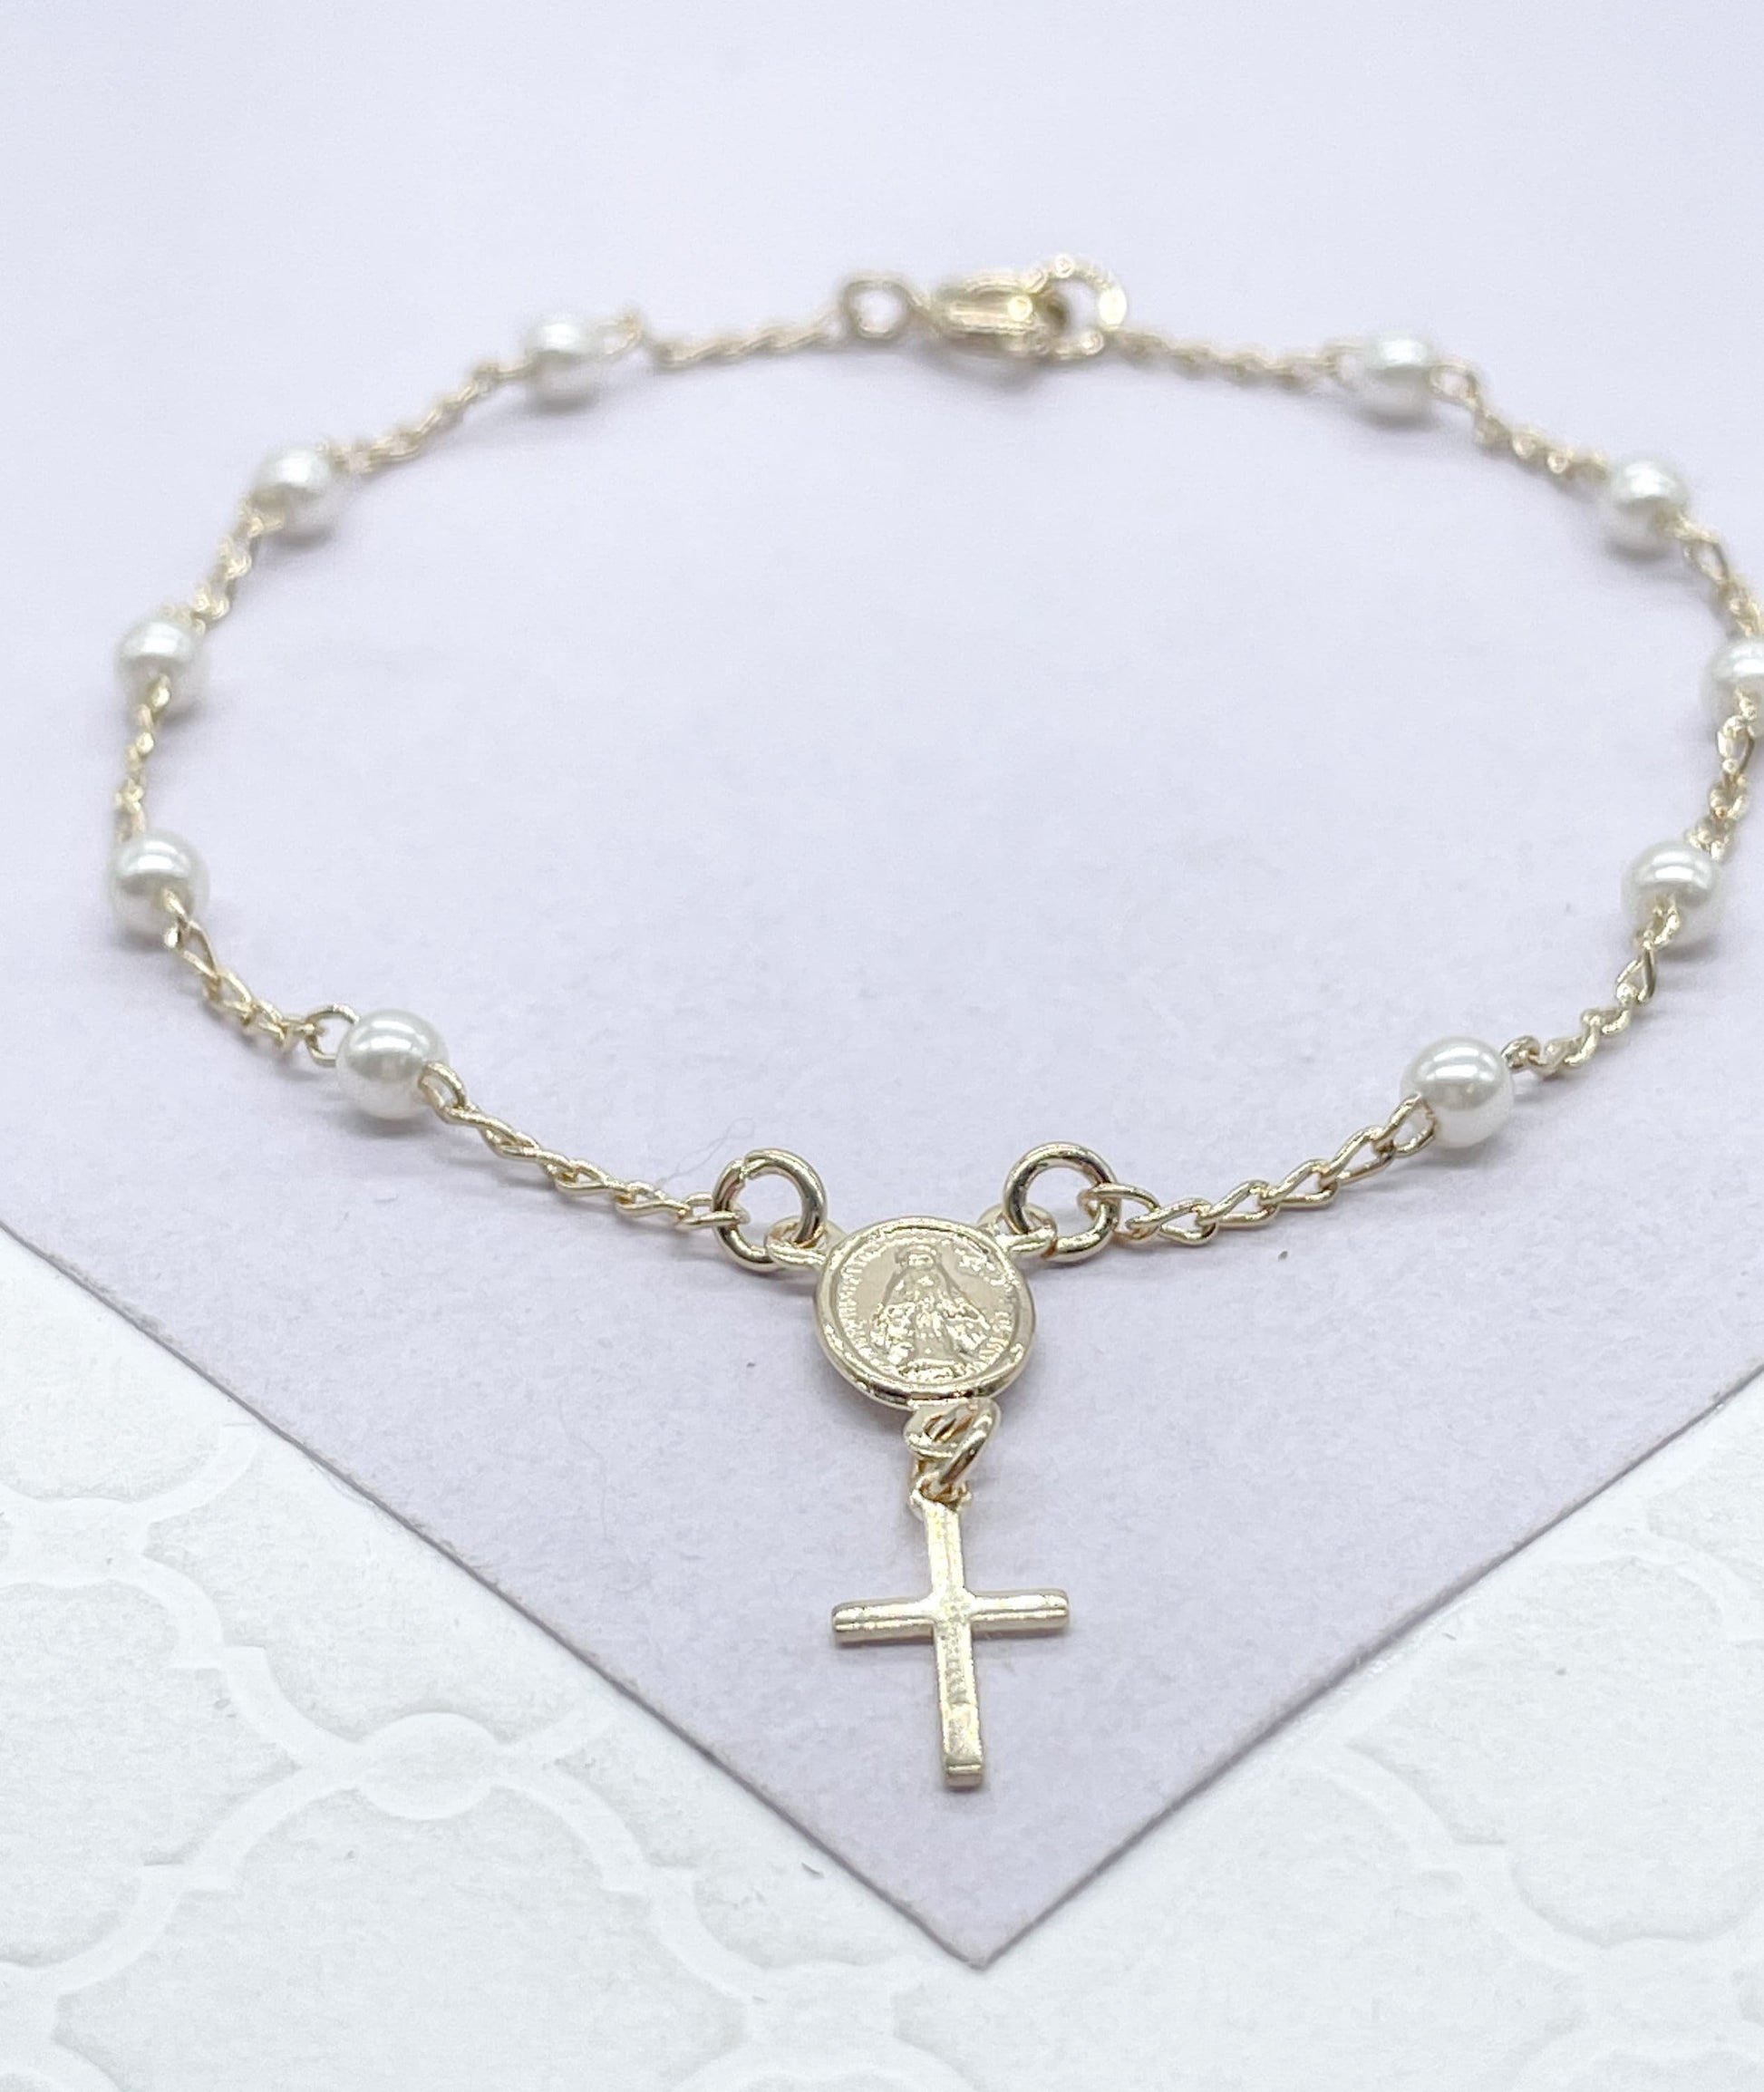 18k Dainty Gold Filled Beaded Pearl Satellite Rosary Bracelet with Virgin Mary and Crucifix Charm